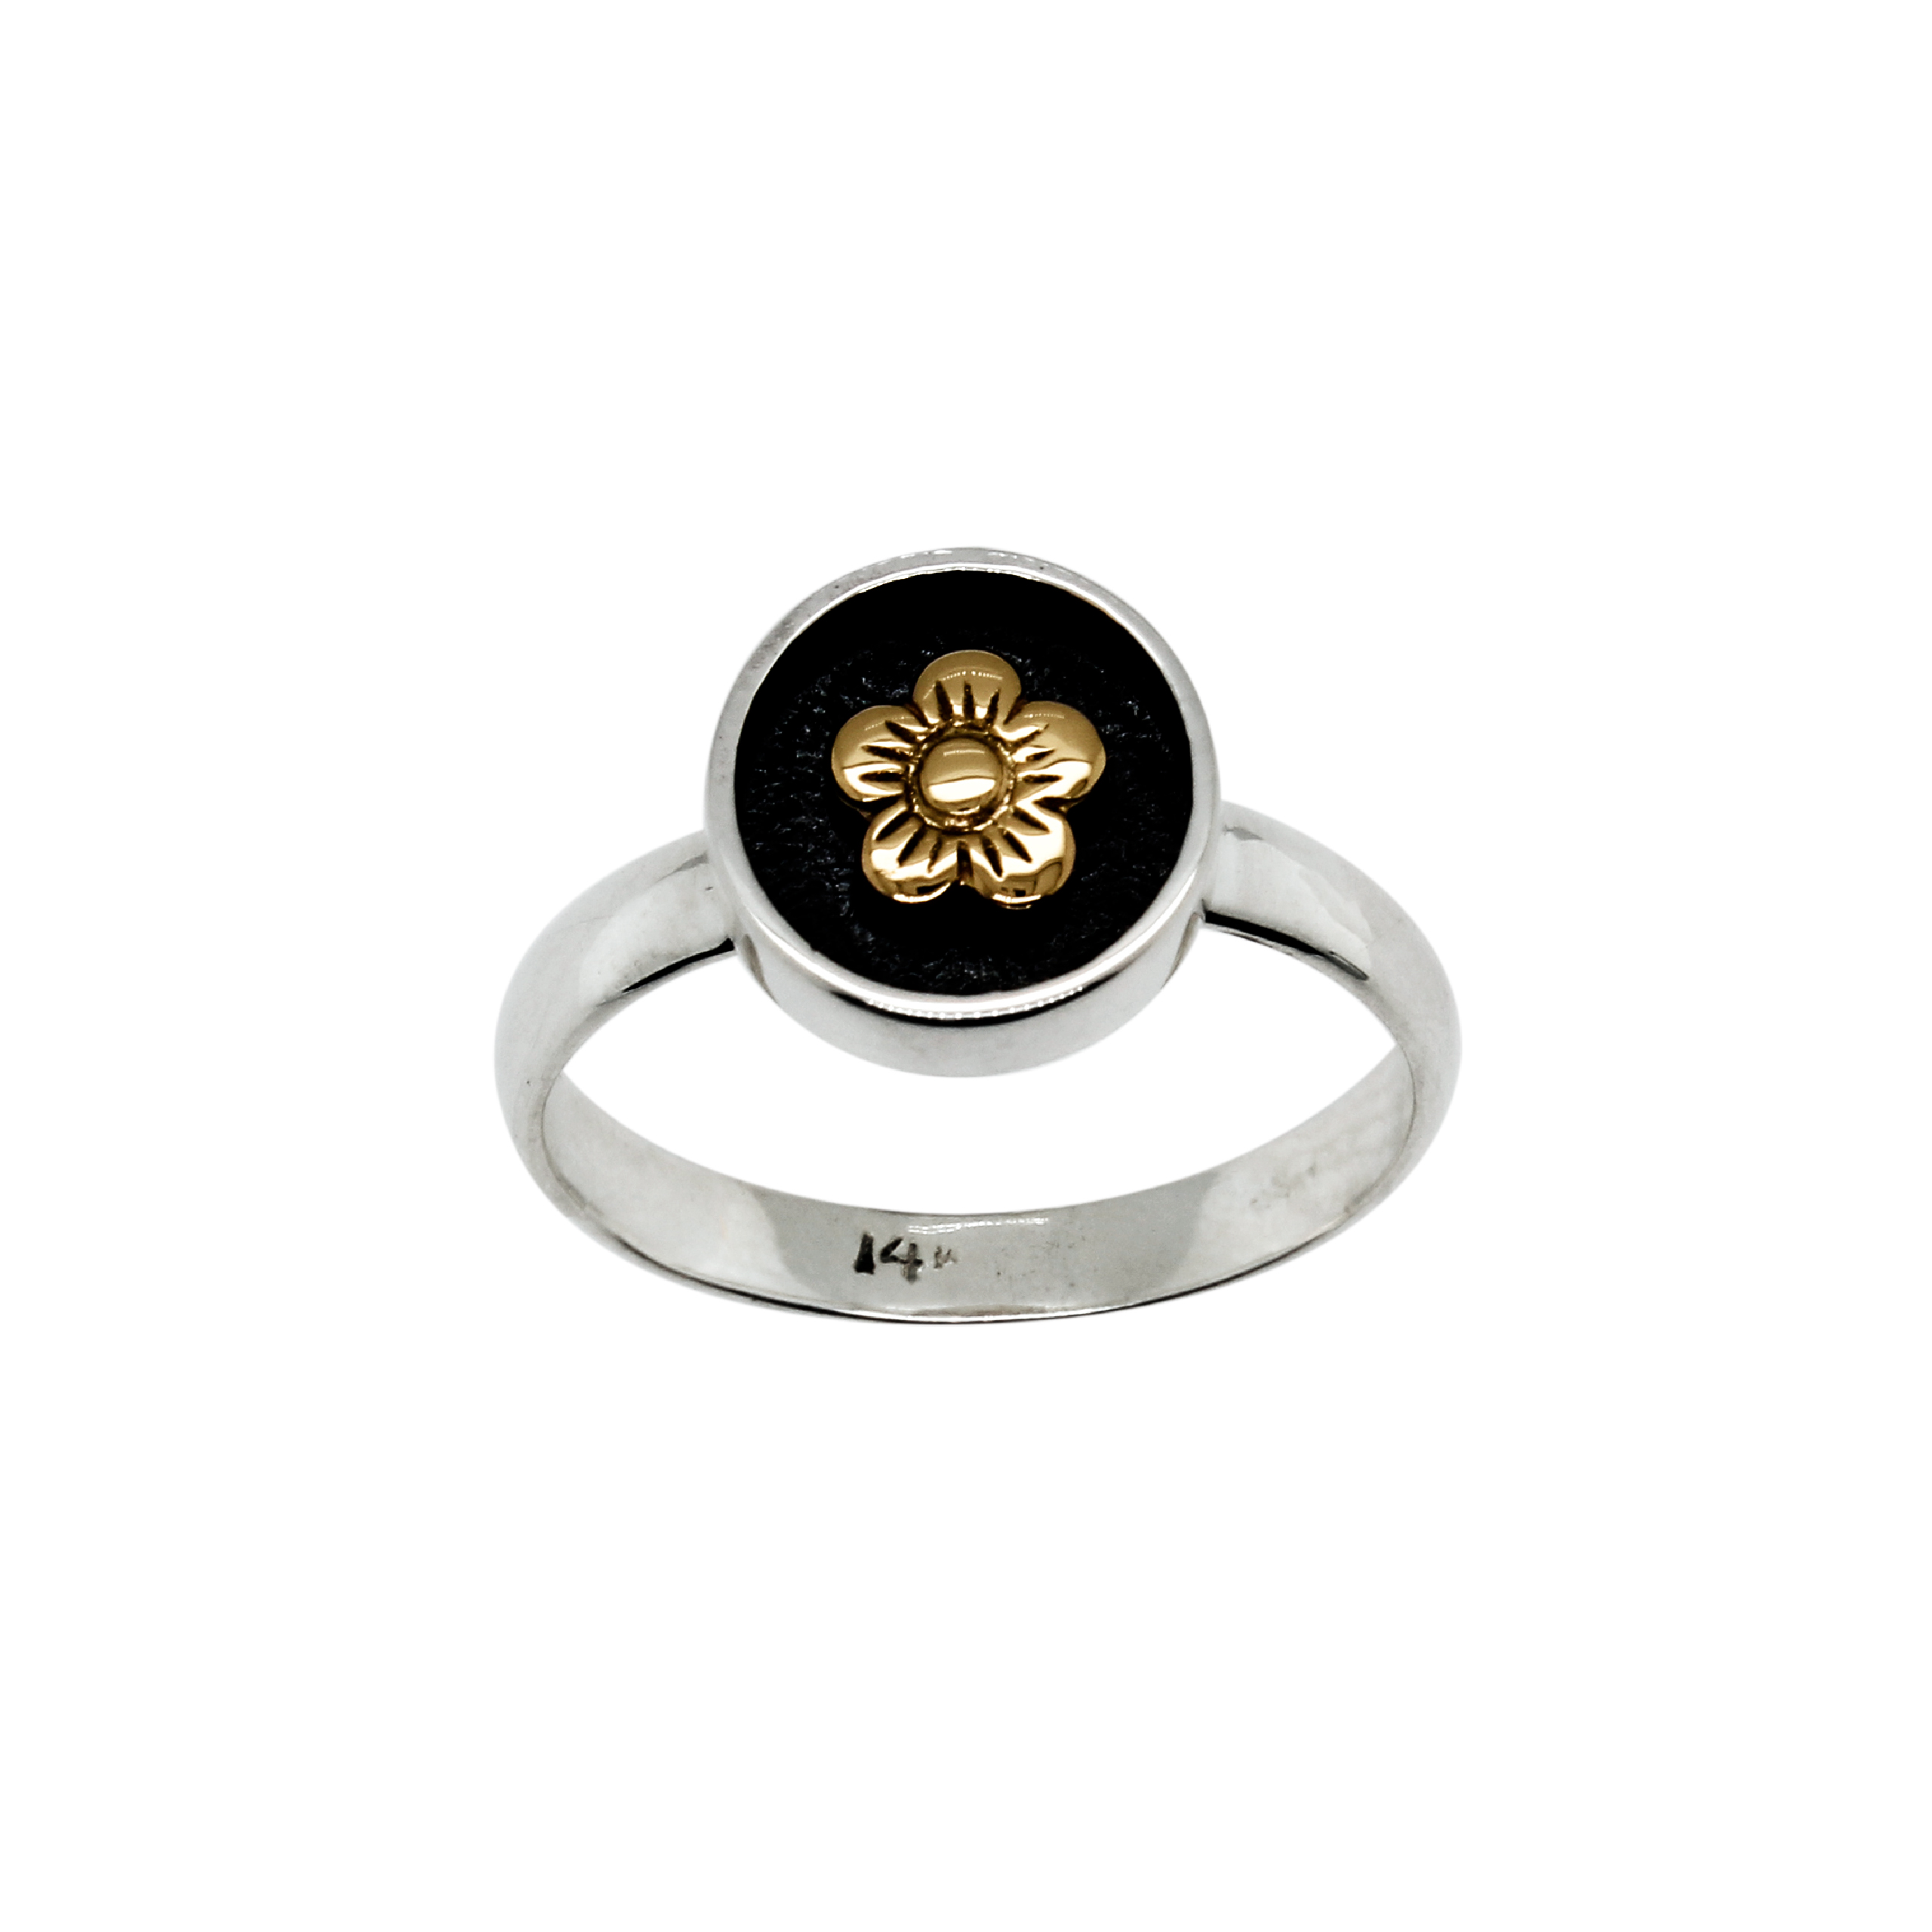 Sterling Silver Ring with a 14k Gold Flower